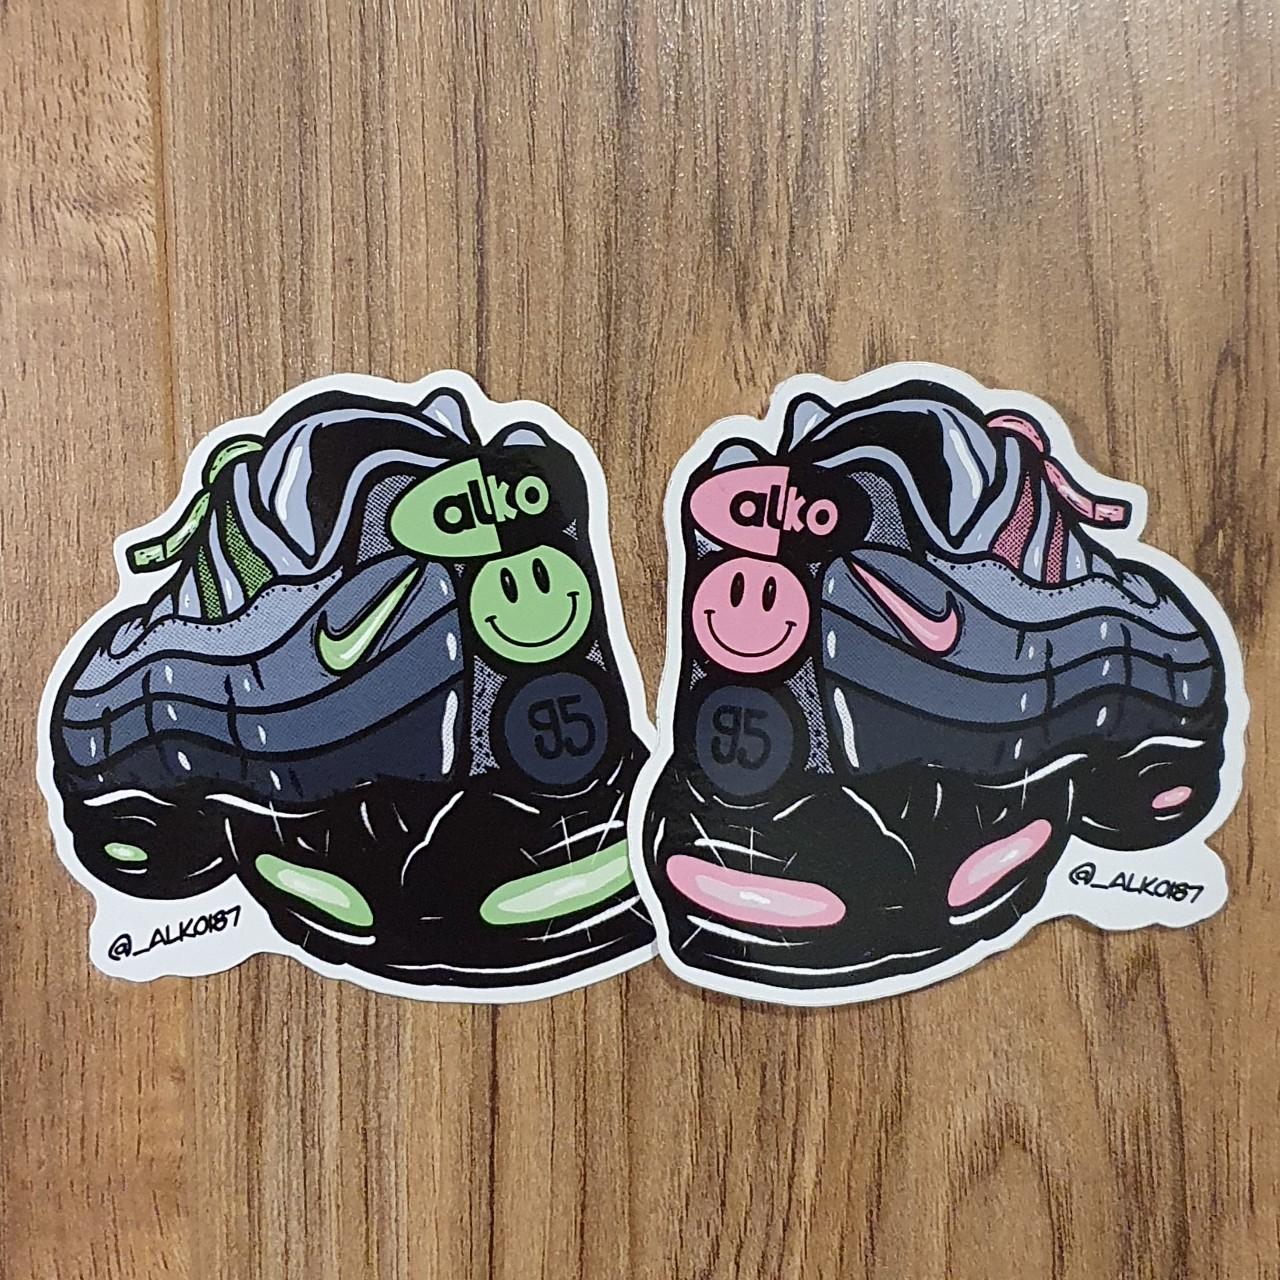 Cute set of Nike stickers :) perfect for laptops, - Depop